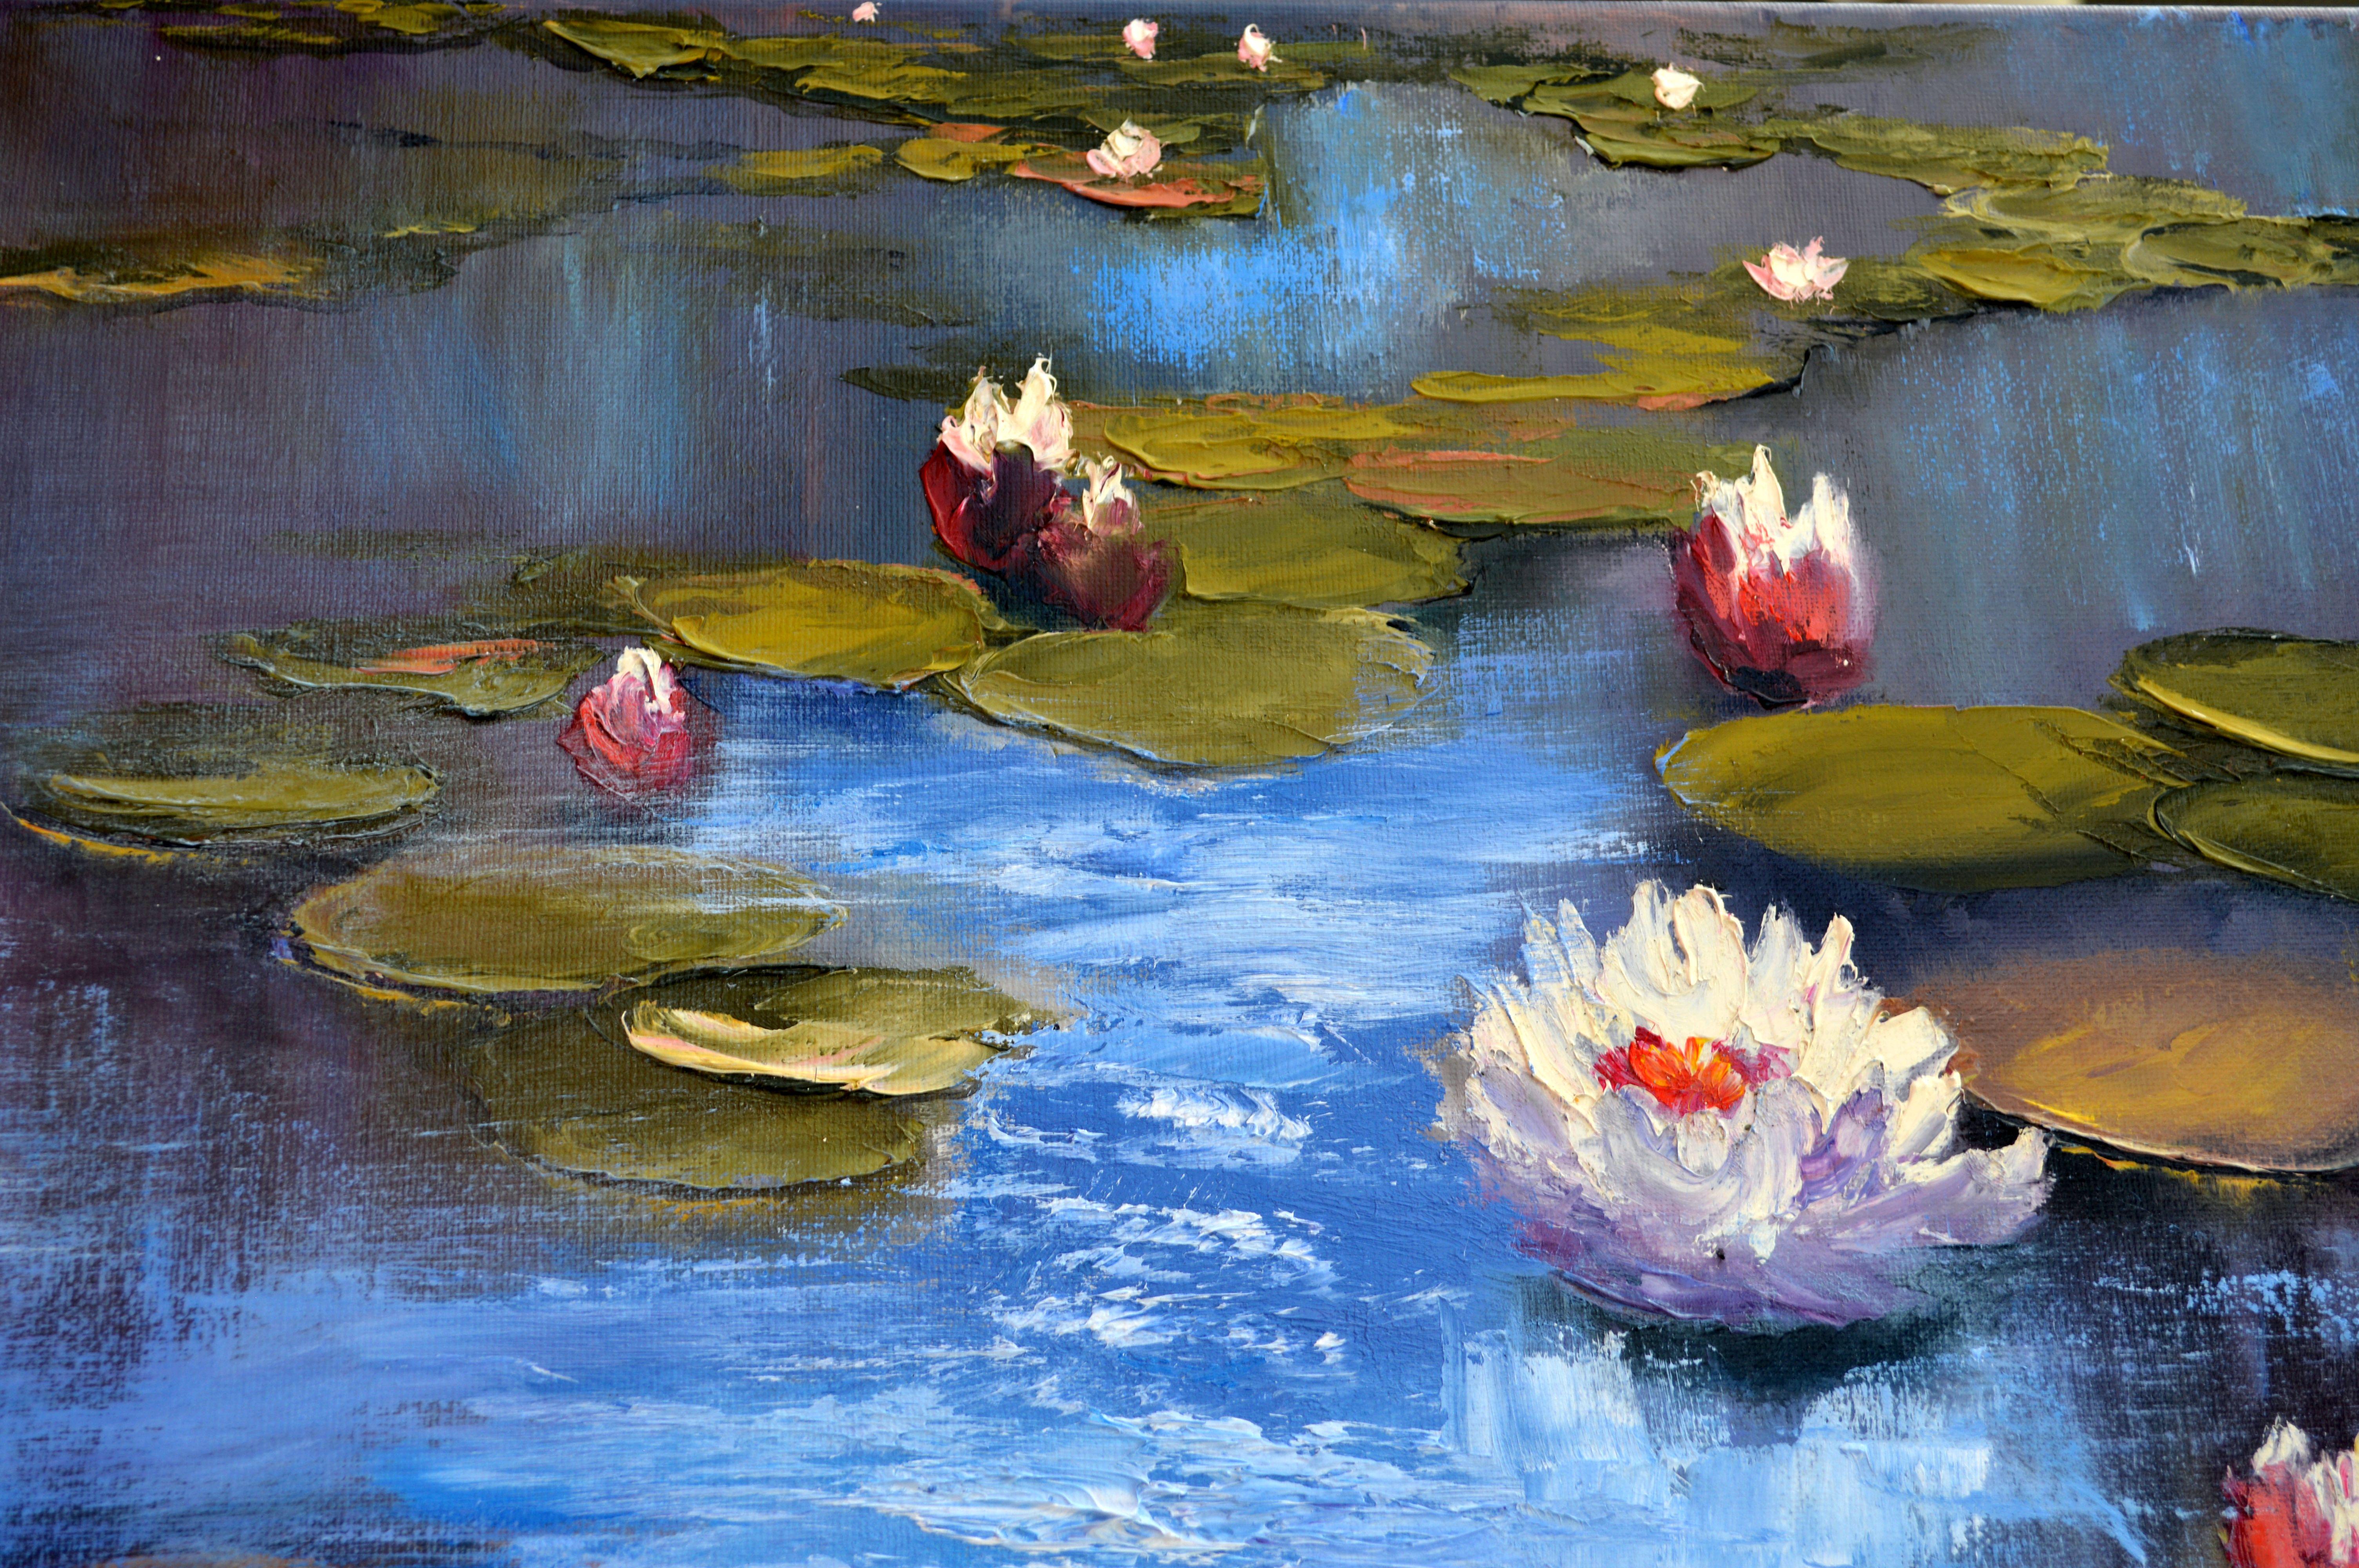 In this vibrant oil on canvas, I sought to capture the serene yet lively spirit of nature. The dappling light dances on water, illuminating lily pads and blossoms, creating a symphony of color and texture. It's a celebration of life's tranquil